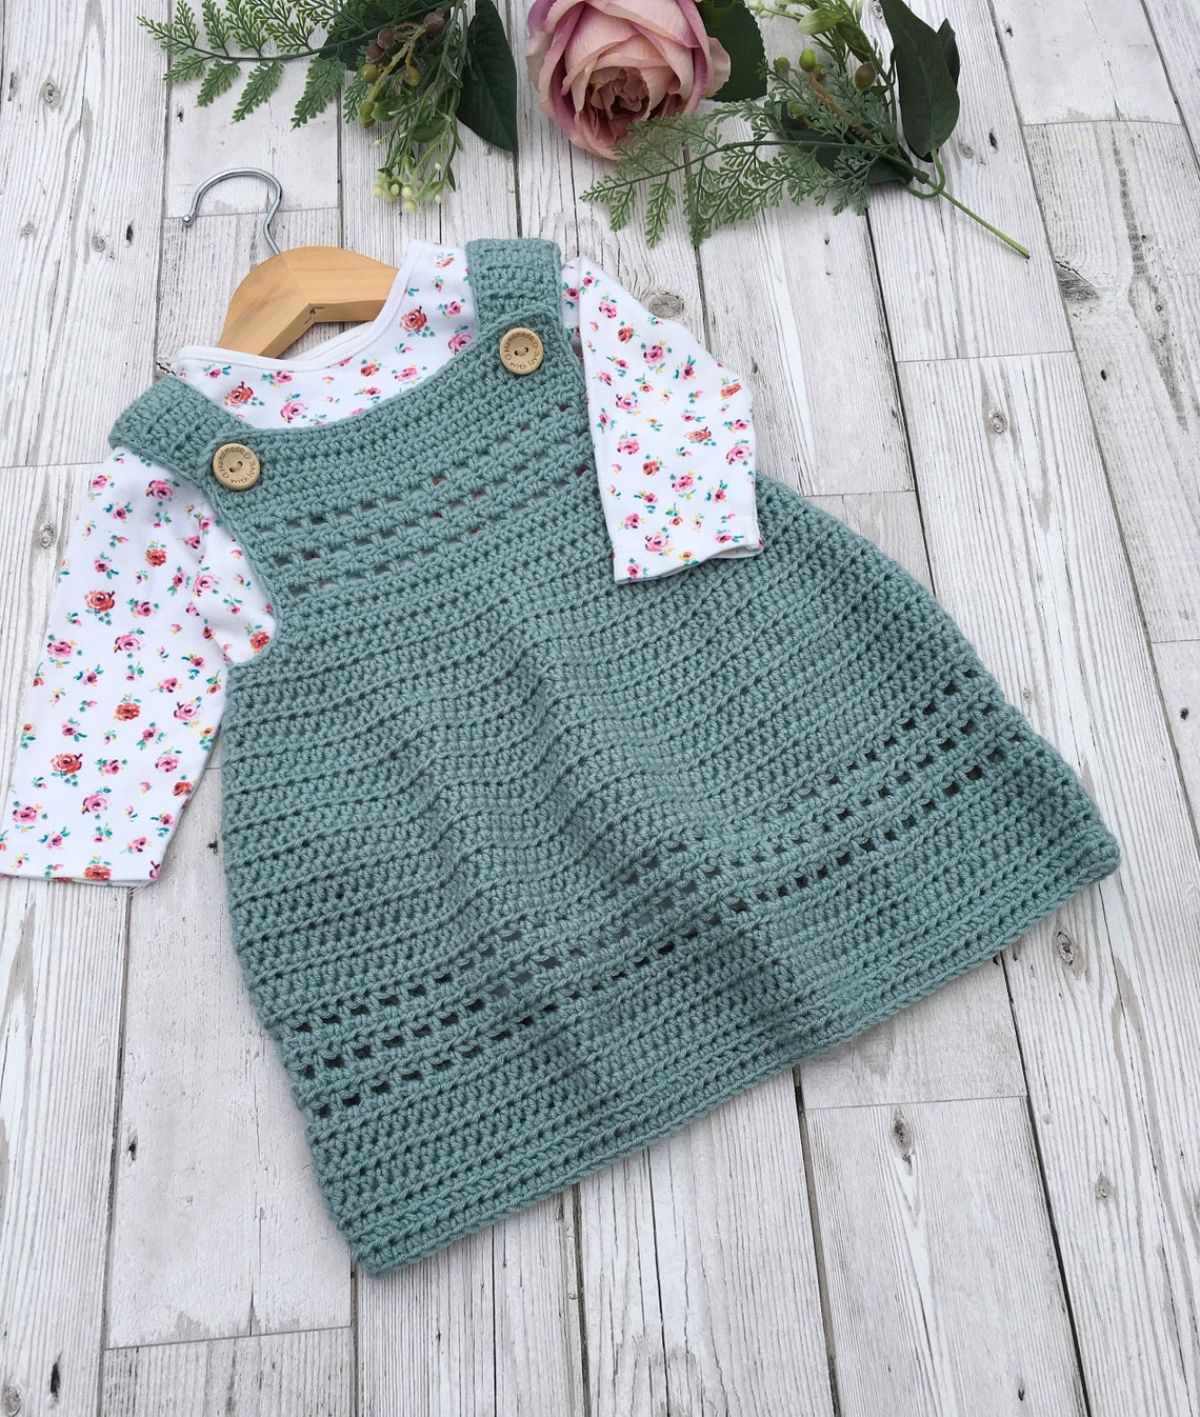 Green crochet pinafore baby dress with a button on either strap with a white floral top underneath.